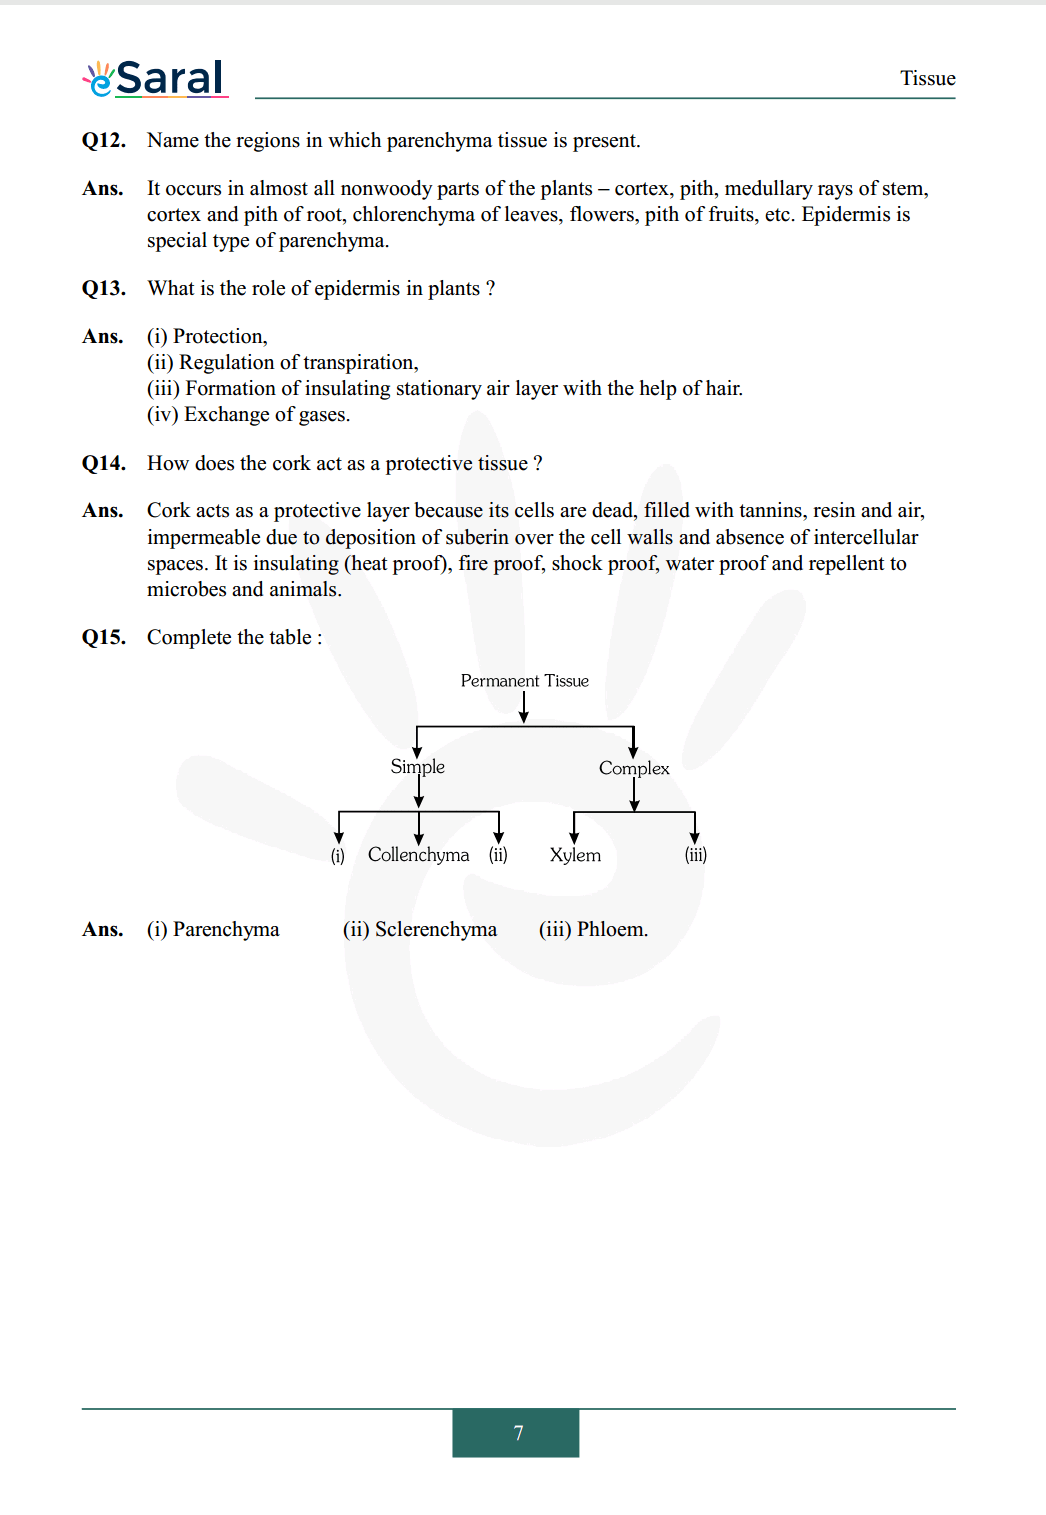 Solution page 8